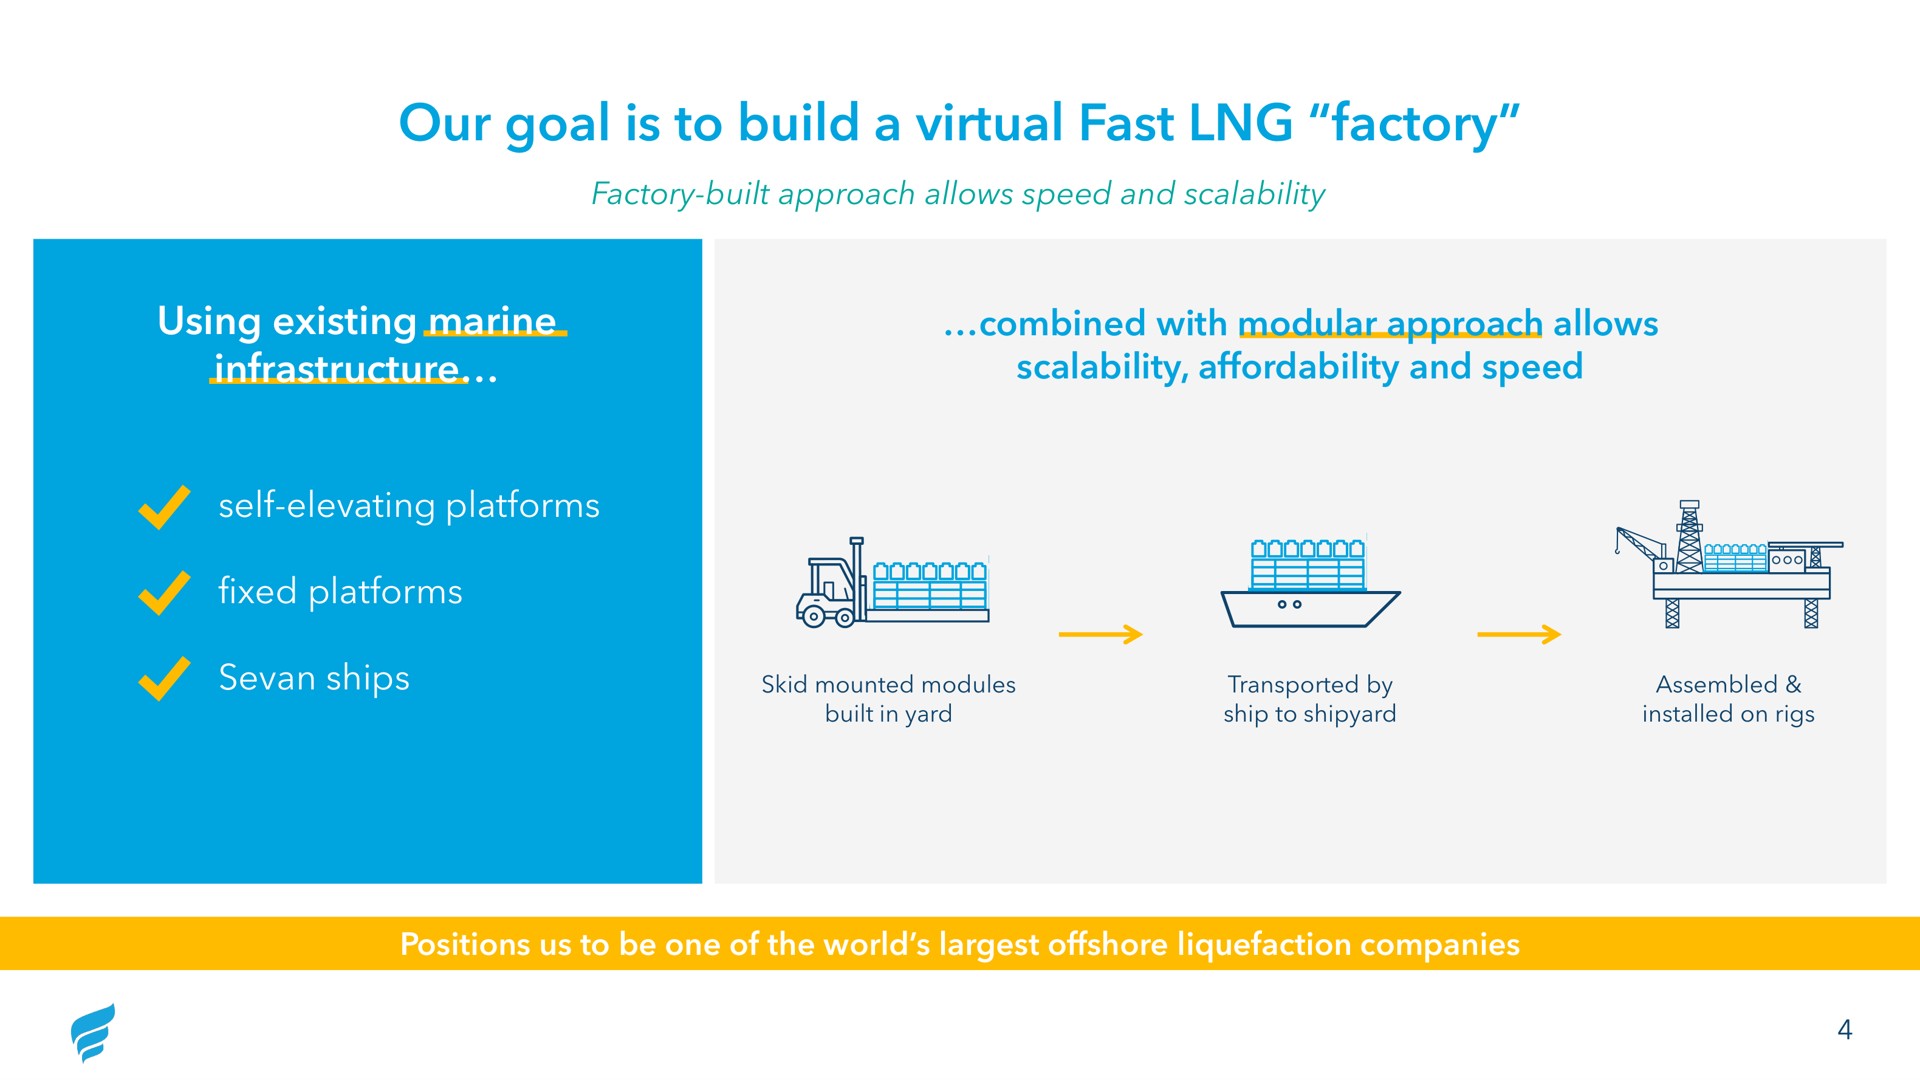 our goal is to build a virtual fast factory | NewFortress Energy